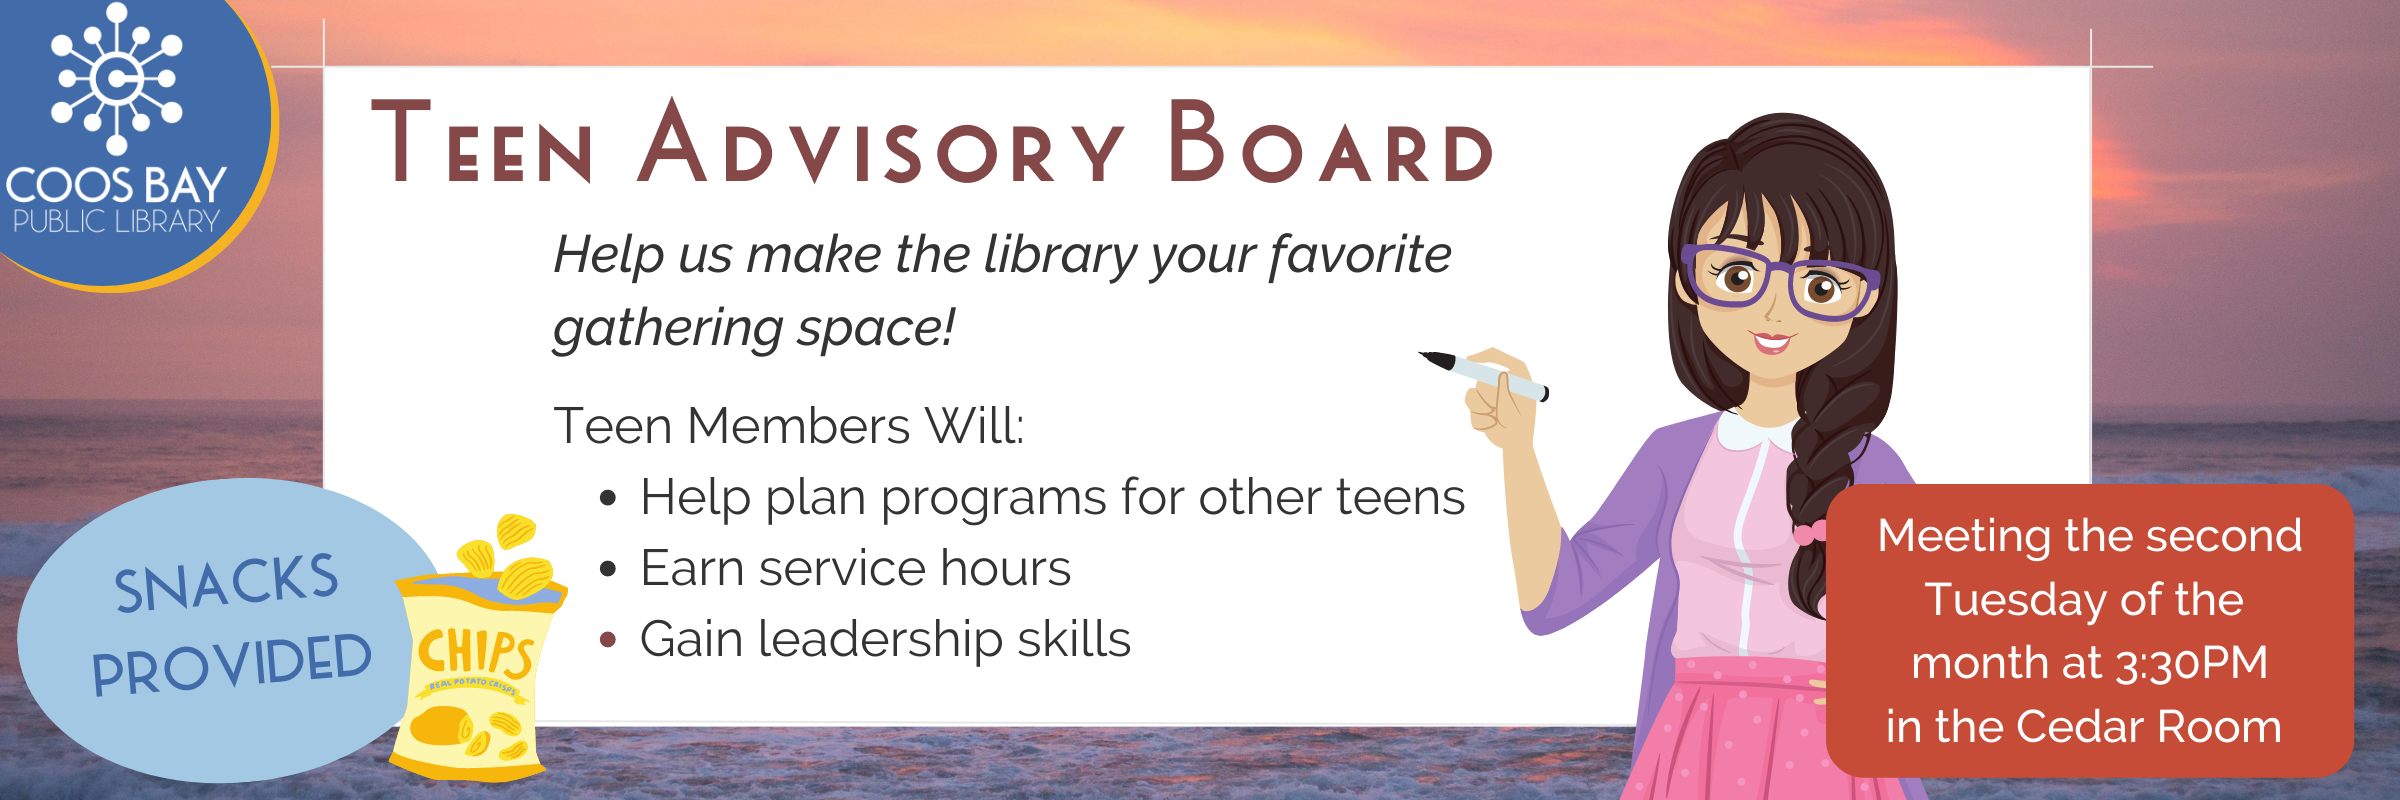 Teen Advisory Board slide that reads "Help us make the library your favorite gathering space! Teen members will help plan programs for other teens, earn service hours, gain leadership skills" 